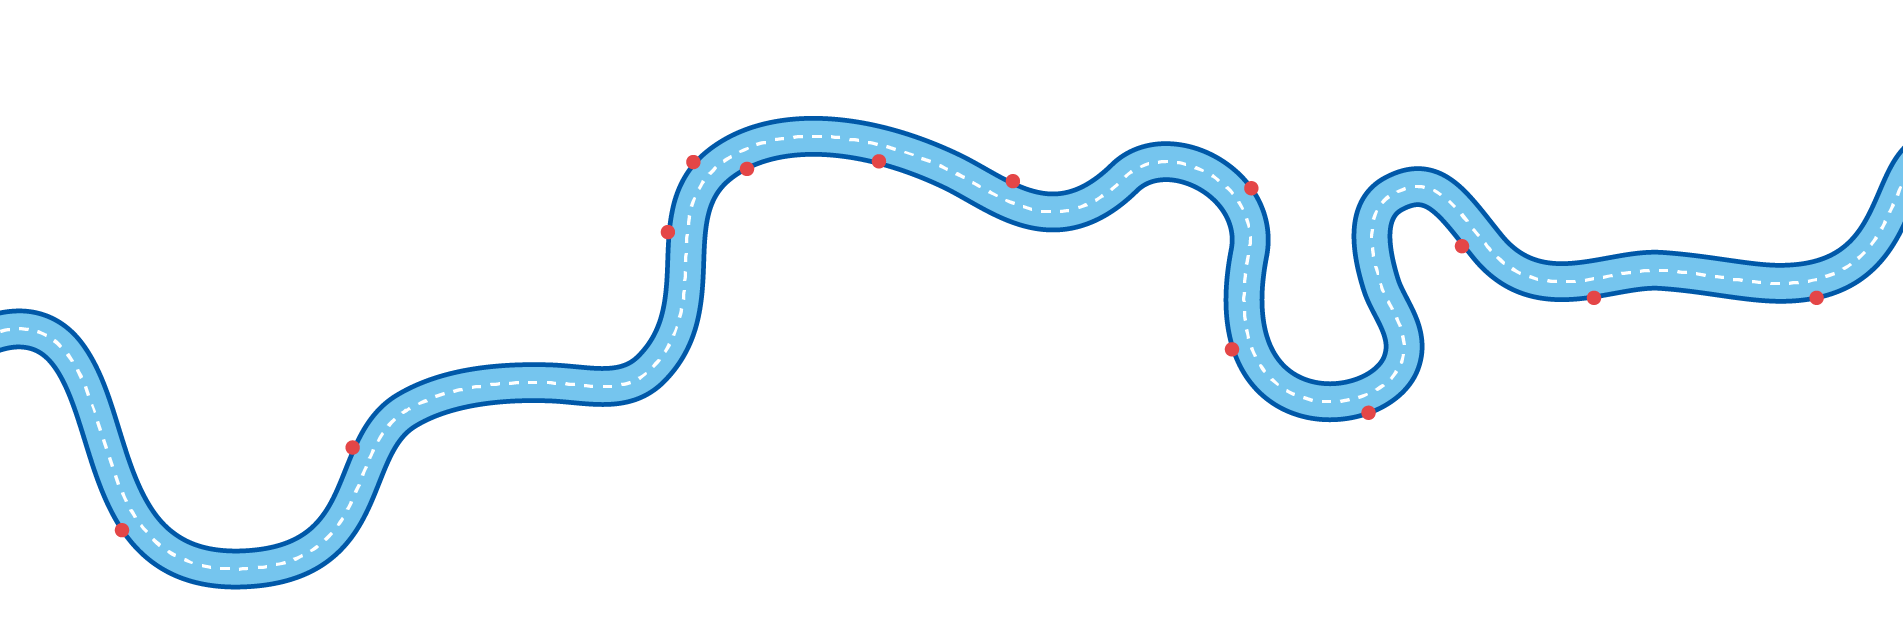 thames river stops map